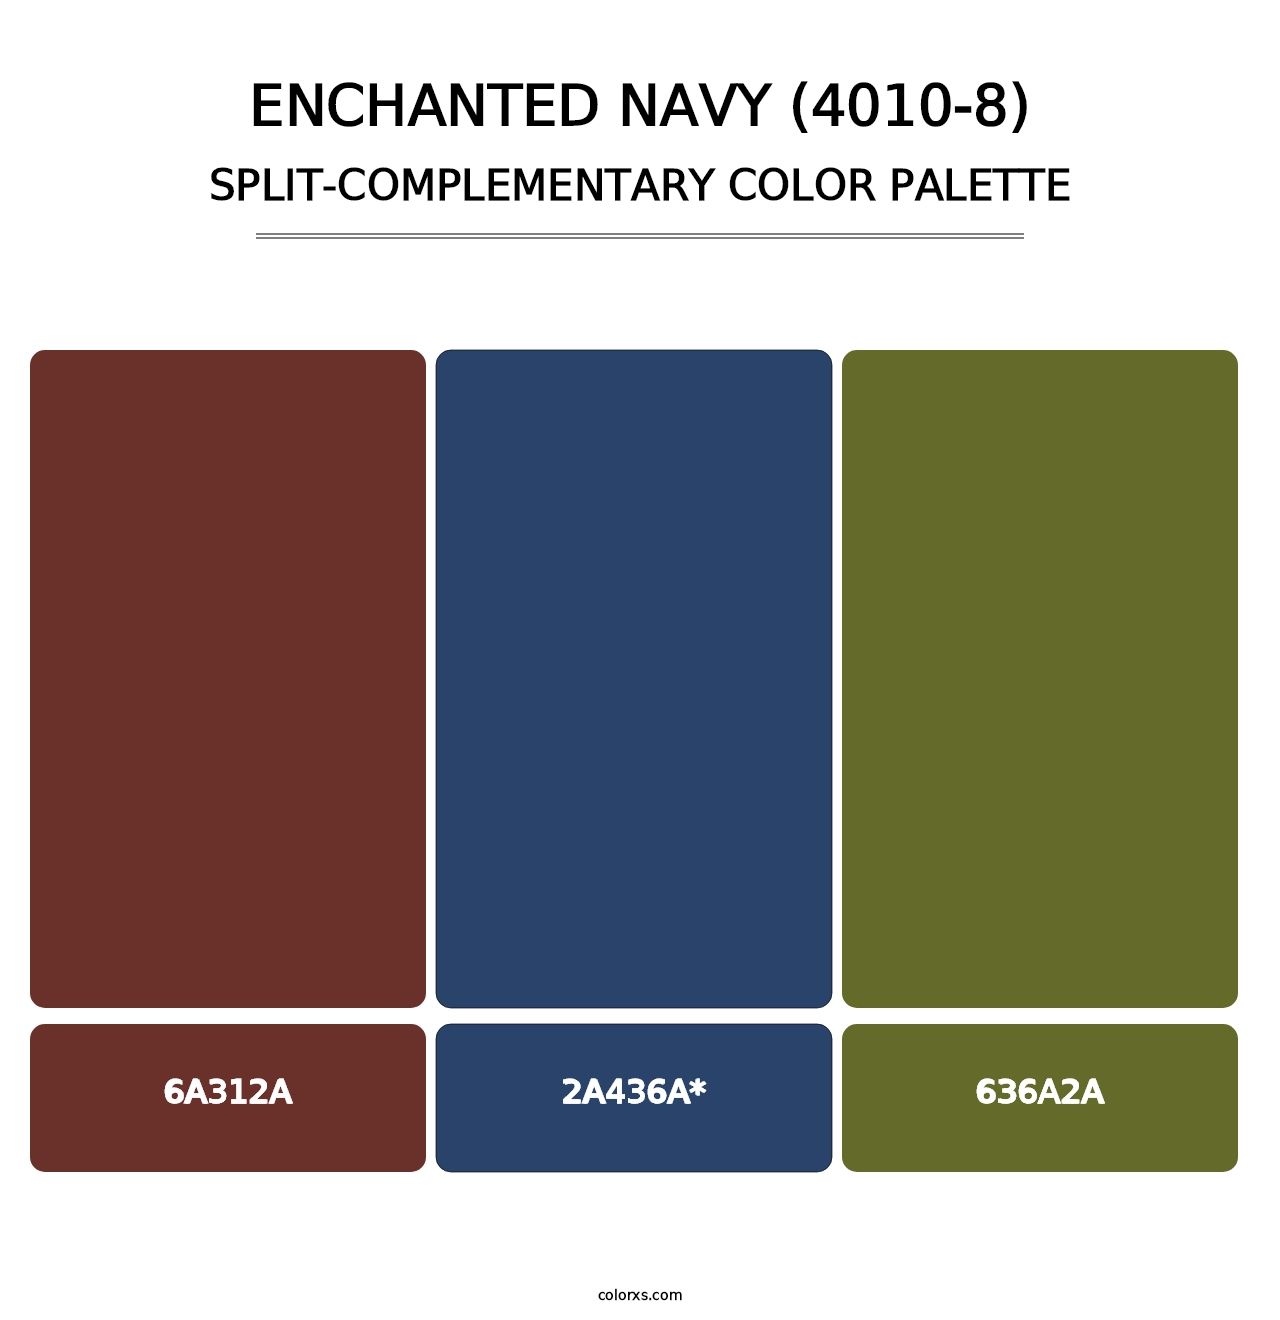 Enchanted Navy (4010-8) - Split-Complementary Color Palette